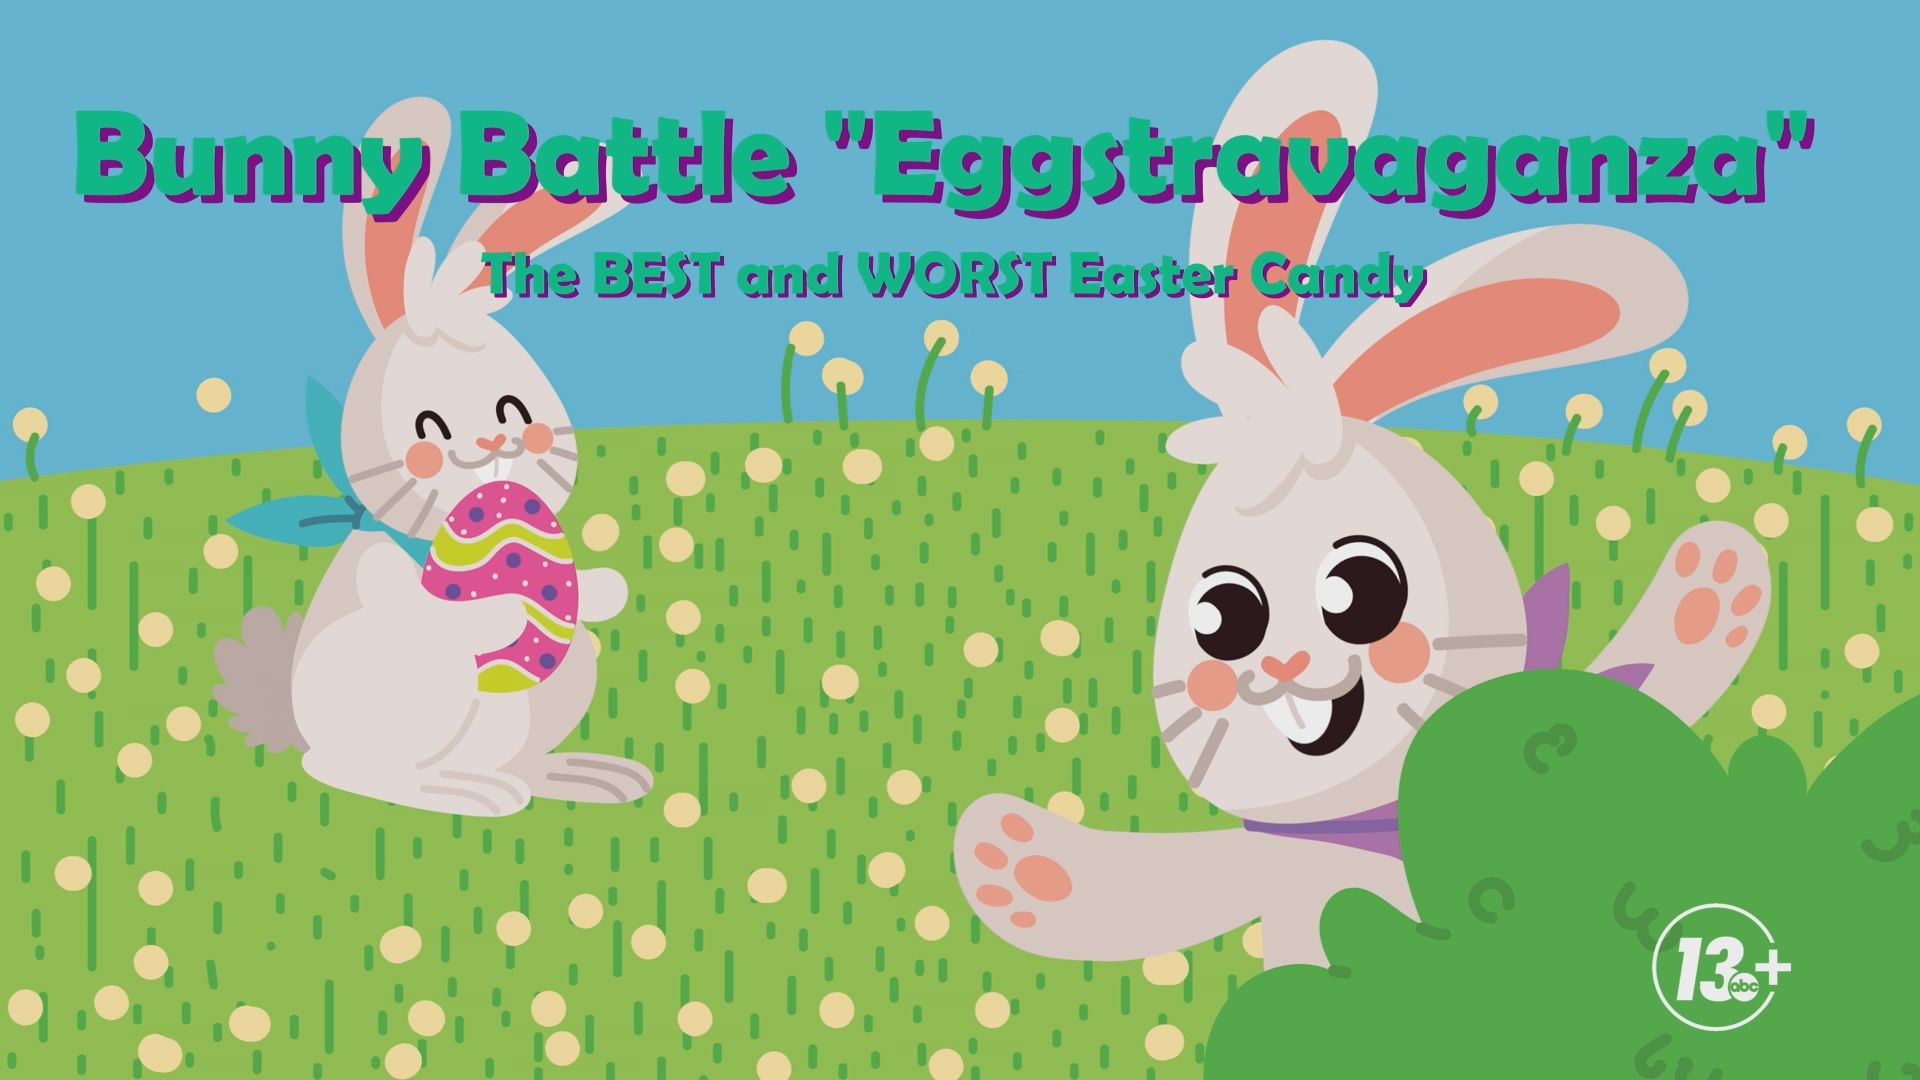 13 ON YOUR SIDE's Riley Mack, Alana Holland and Steven Bohner put the 10 worst and best Easter candies to the test in the Bunny Battle Eggstravaganza!